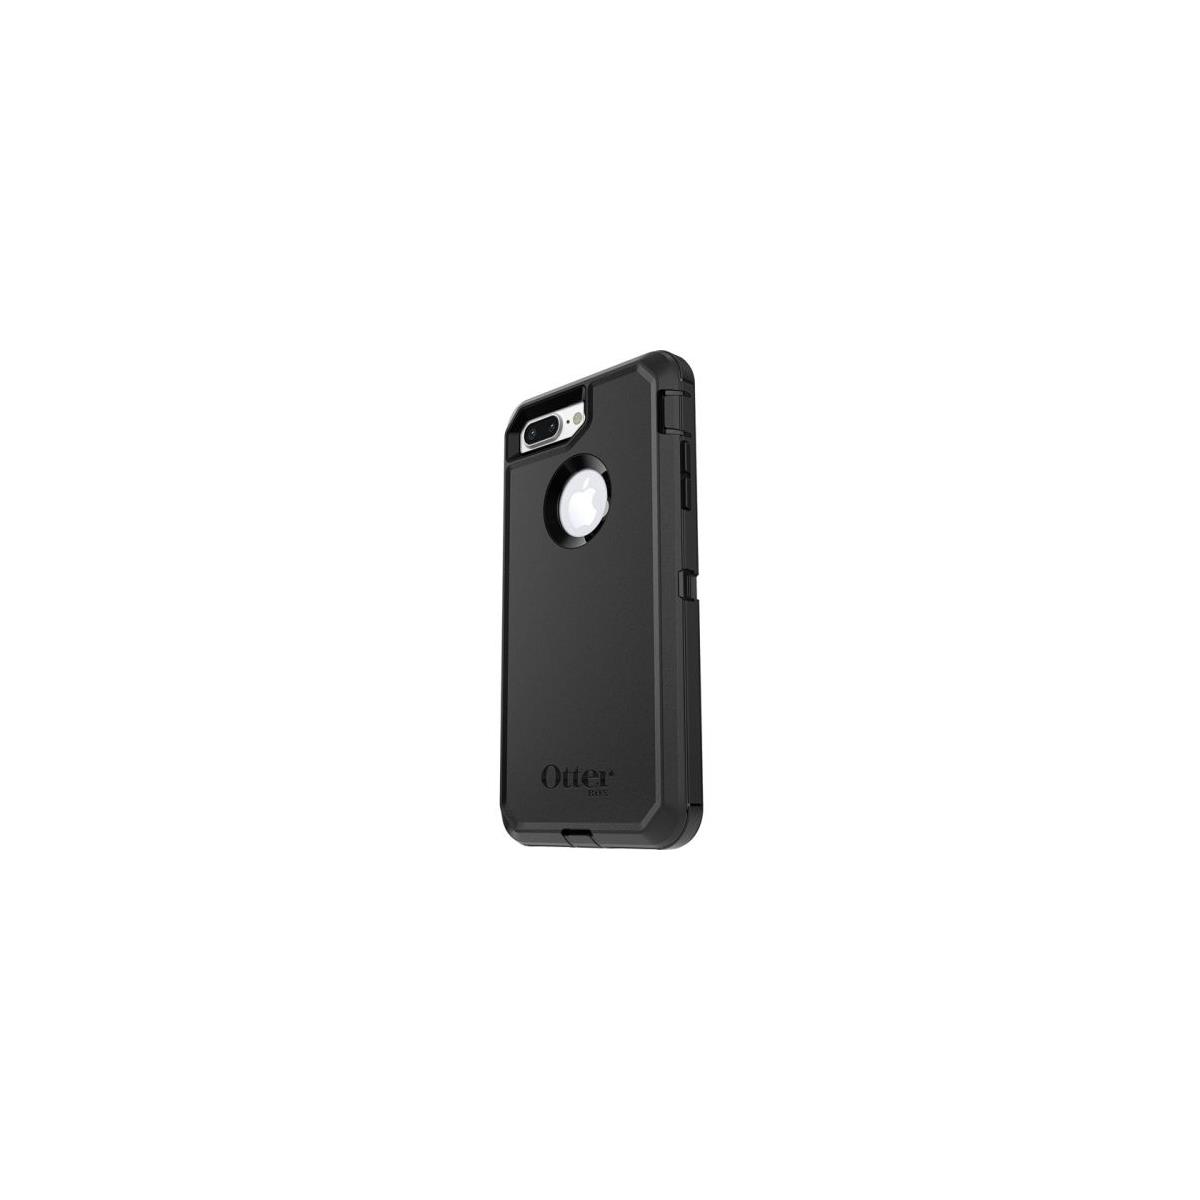 Image of OtterBox Defender Series Pro Pack Case for iPhone 7 Plus